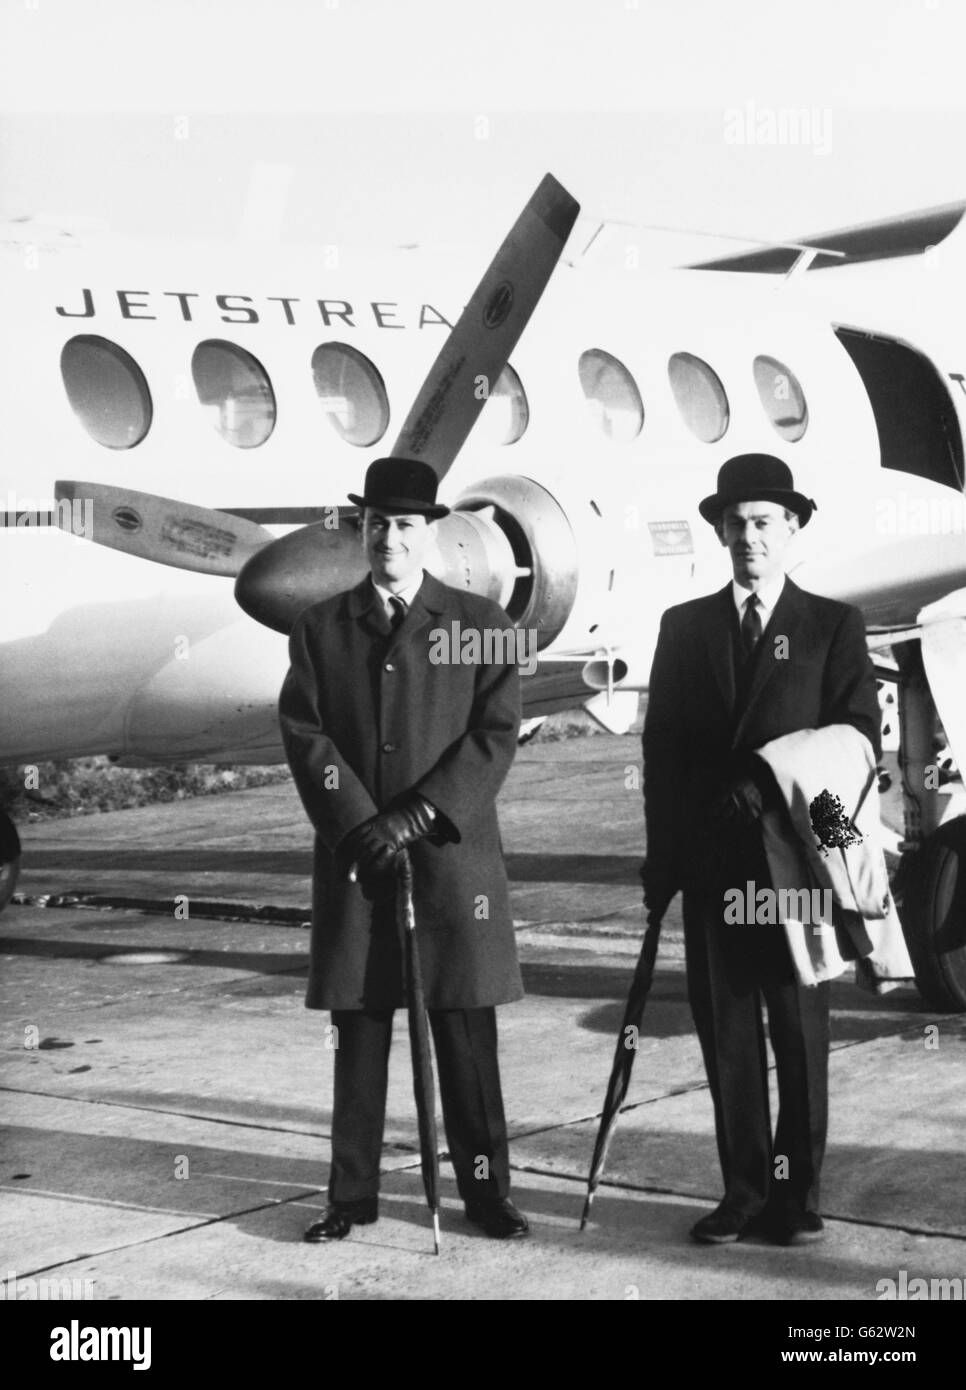 Bowler-hatted Handley Page chief test pilot, J.W. Allam (Johnny), of Fyfield Lodge, Kings Langley, Hertfordshire, and another Handley Page test pilot, G.H. Moreau, of Hartfield Road, Elstree, Hertfordshire, pictured before take-off in Handley Page's first prototype Jetstream - Britain's latest executive and local service transport - from the constructor's Radlett's aerodrome headquarters in Hertfordshire en-route for Pau in south-west France. The Jetsream has travelled to France for certification trials to be undertaken with less risk of inclement weather in France. Stock Photo